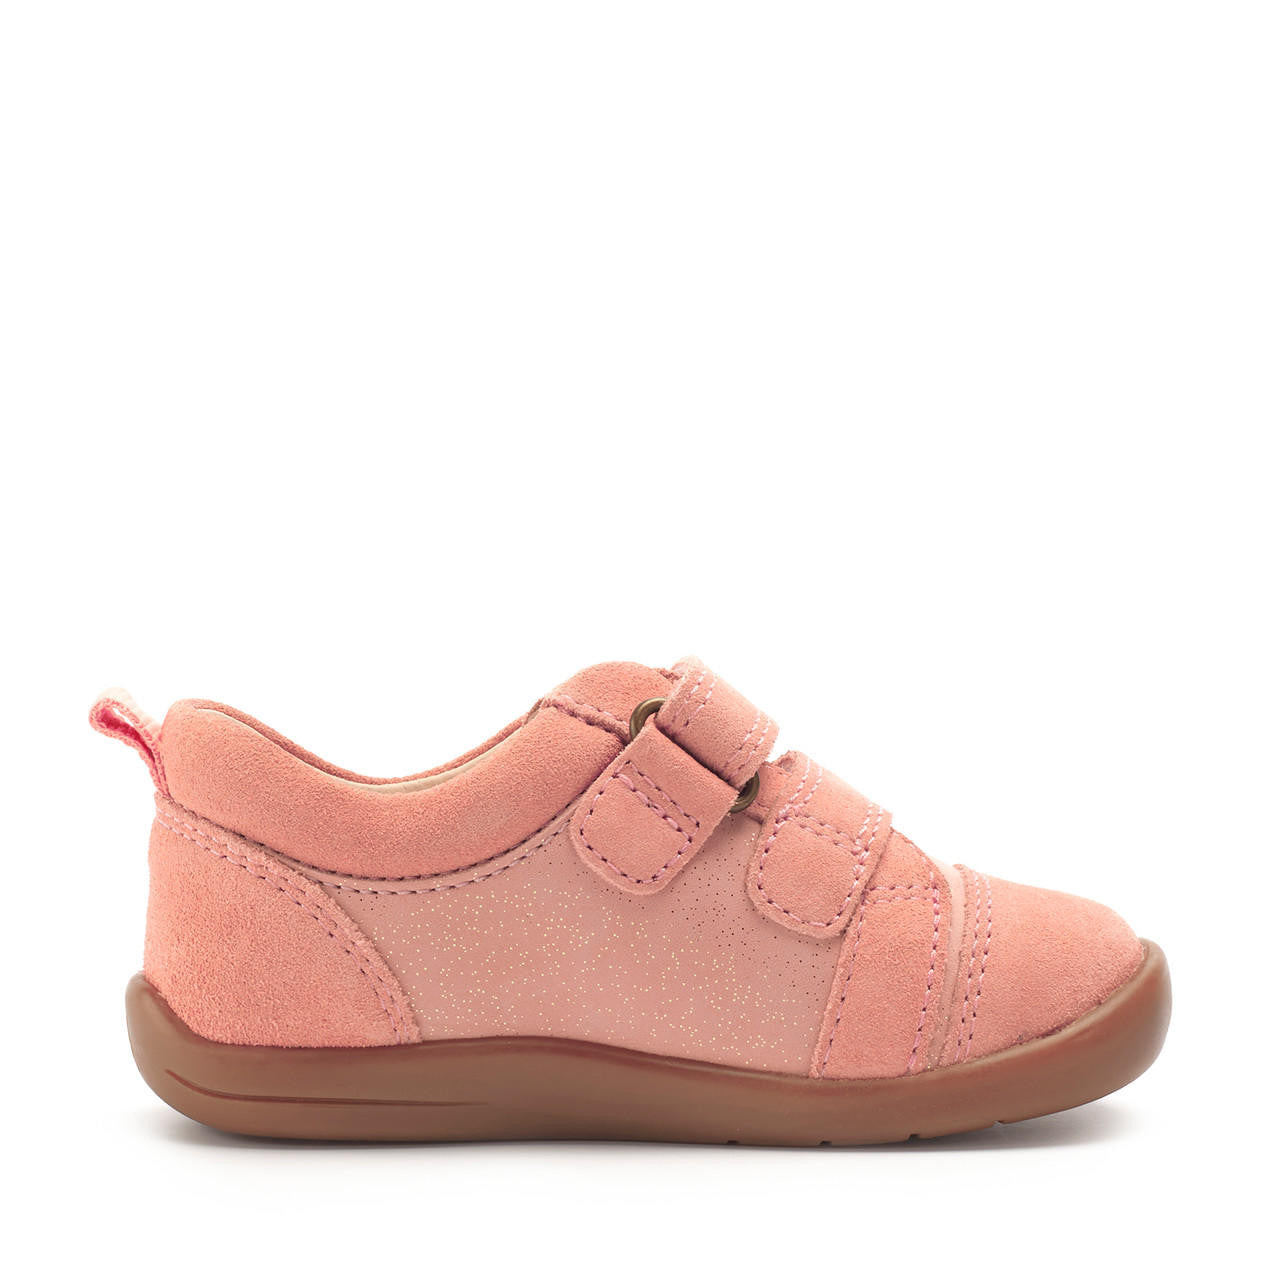 A girls casual shoe by Start Rite, style Maze, in pink and gold with double velcro fastening. Inner side view.